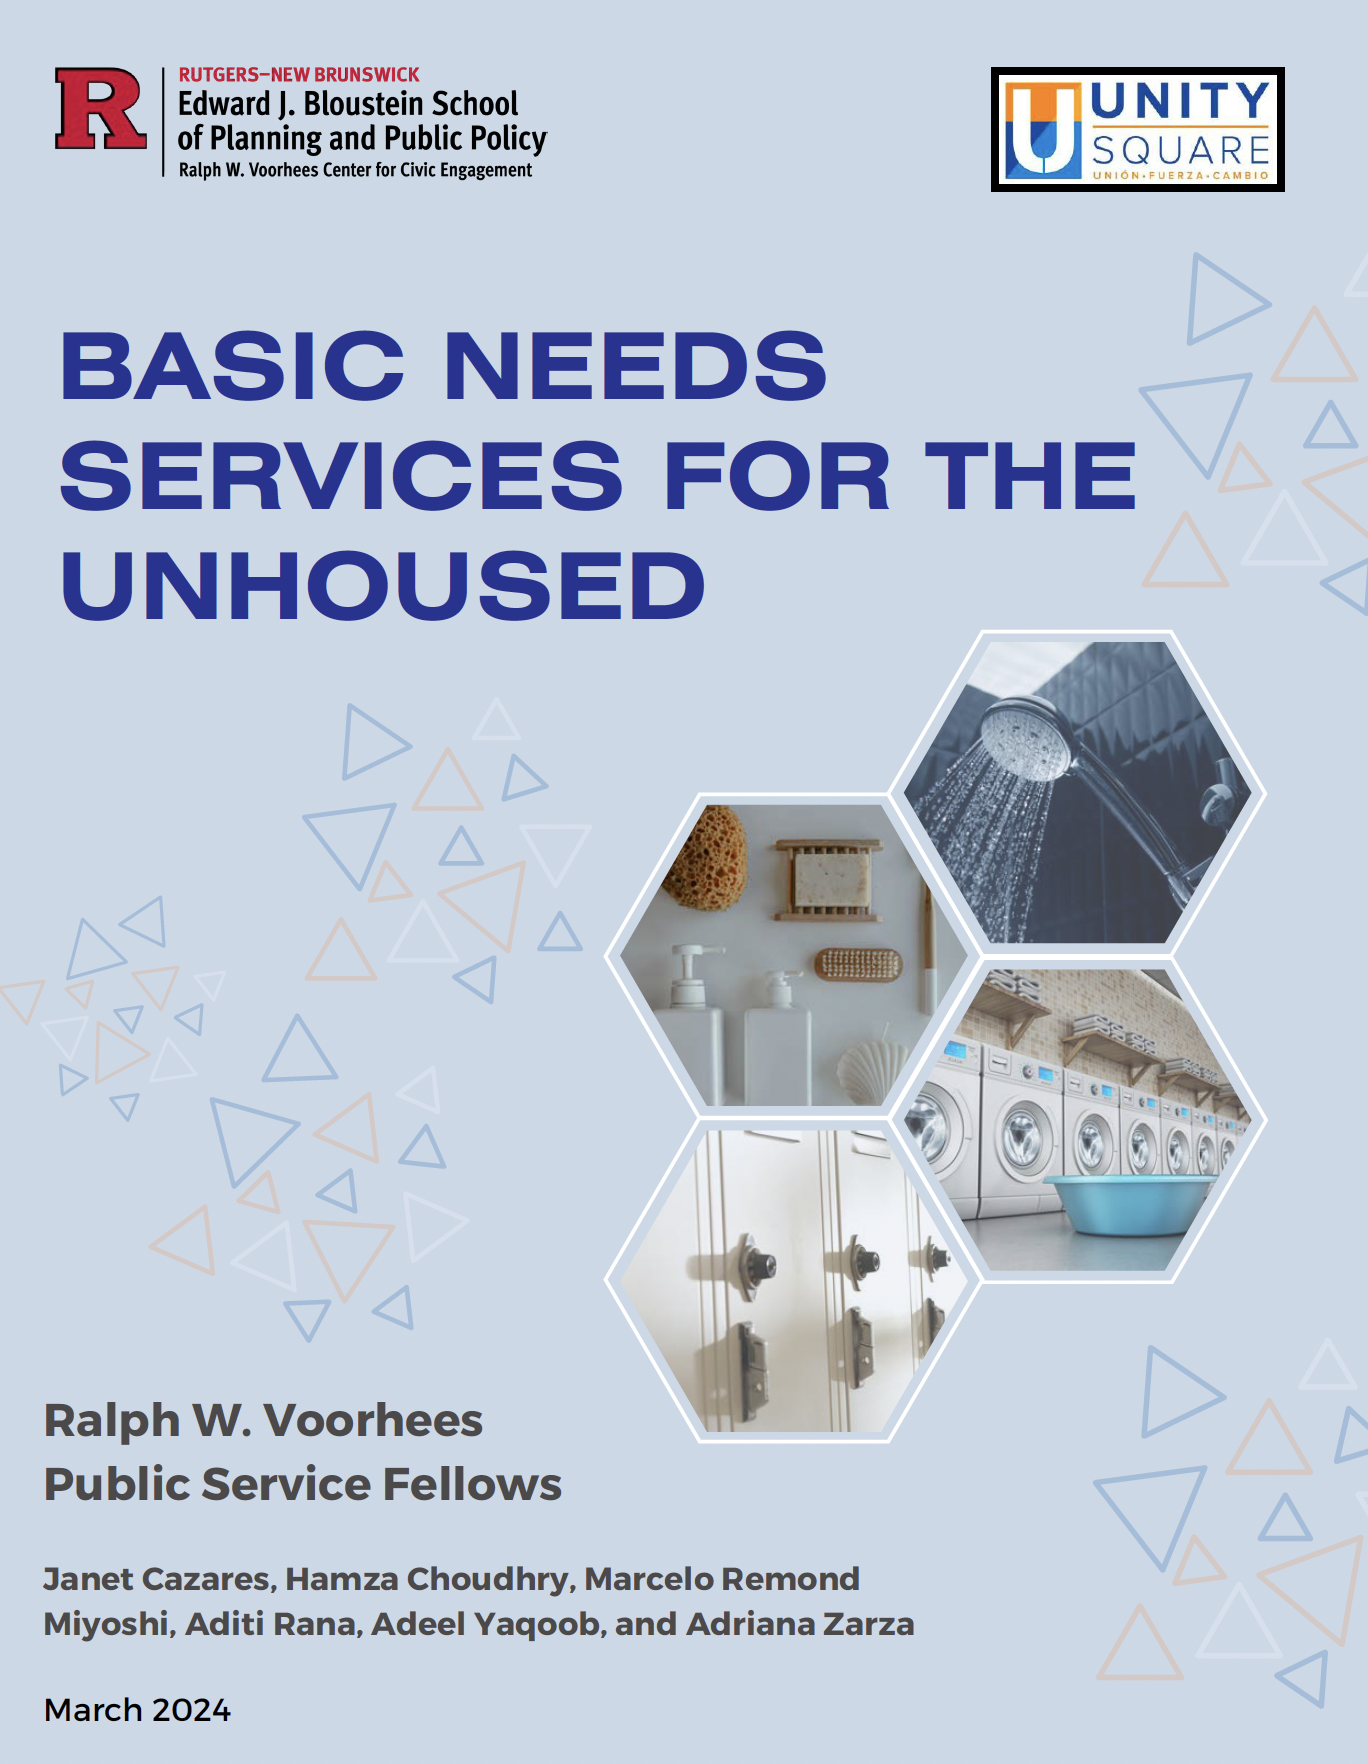 Fellows report basic needs unhoused Rutgers Voorhees Center